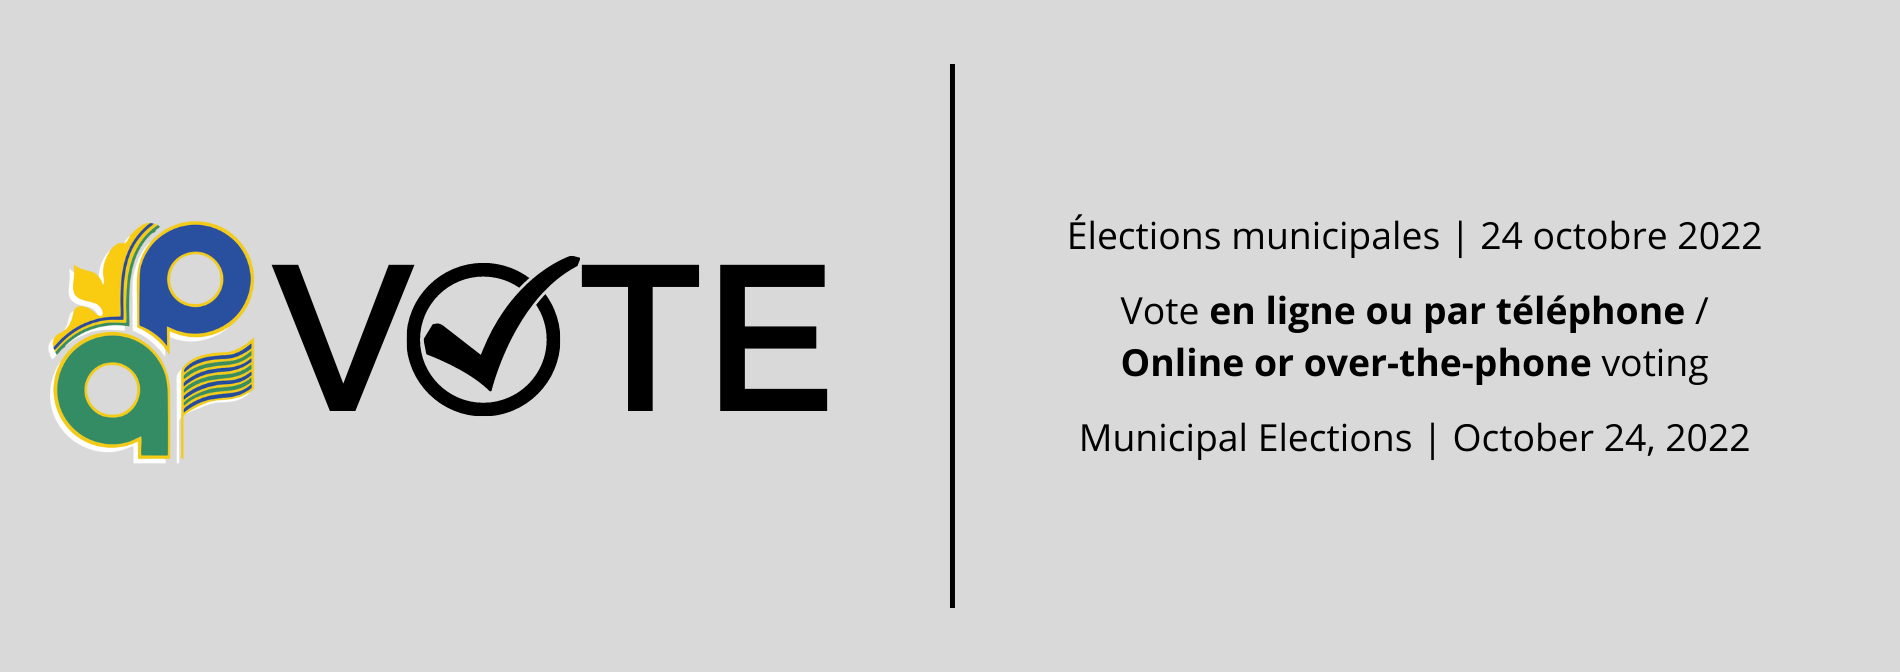 Vote for the municipal elections on October 24, 2022.